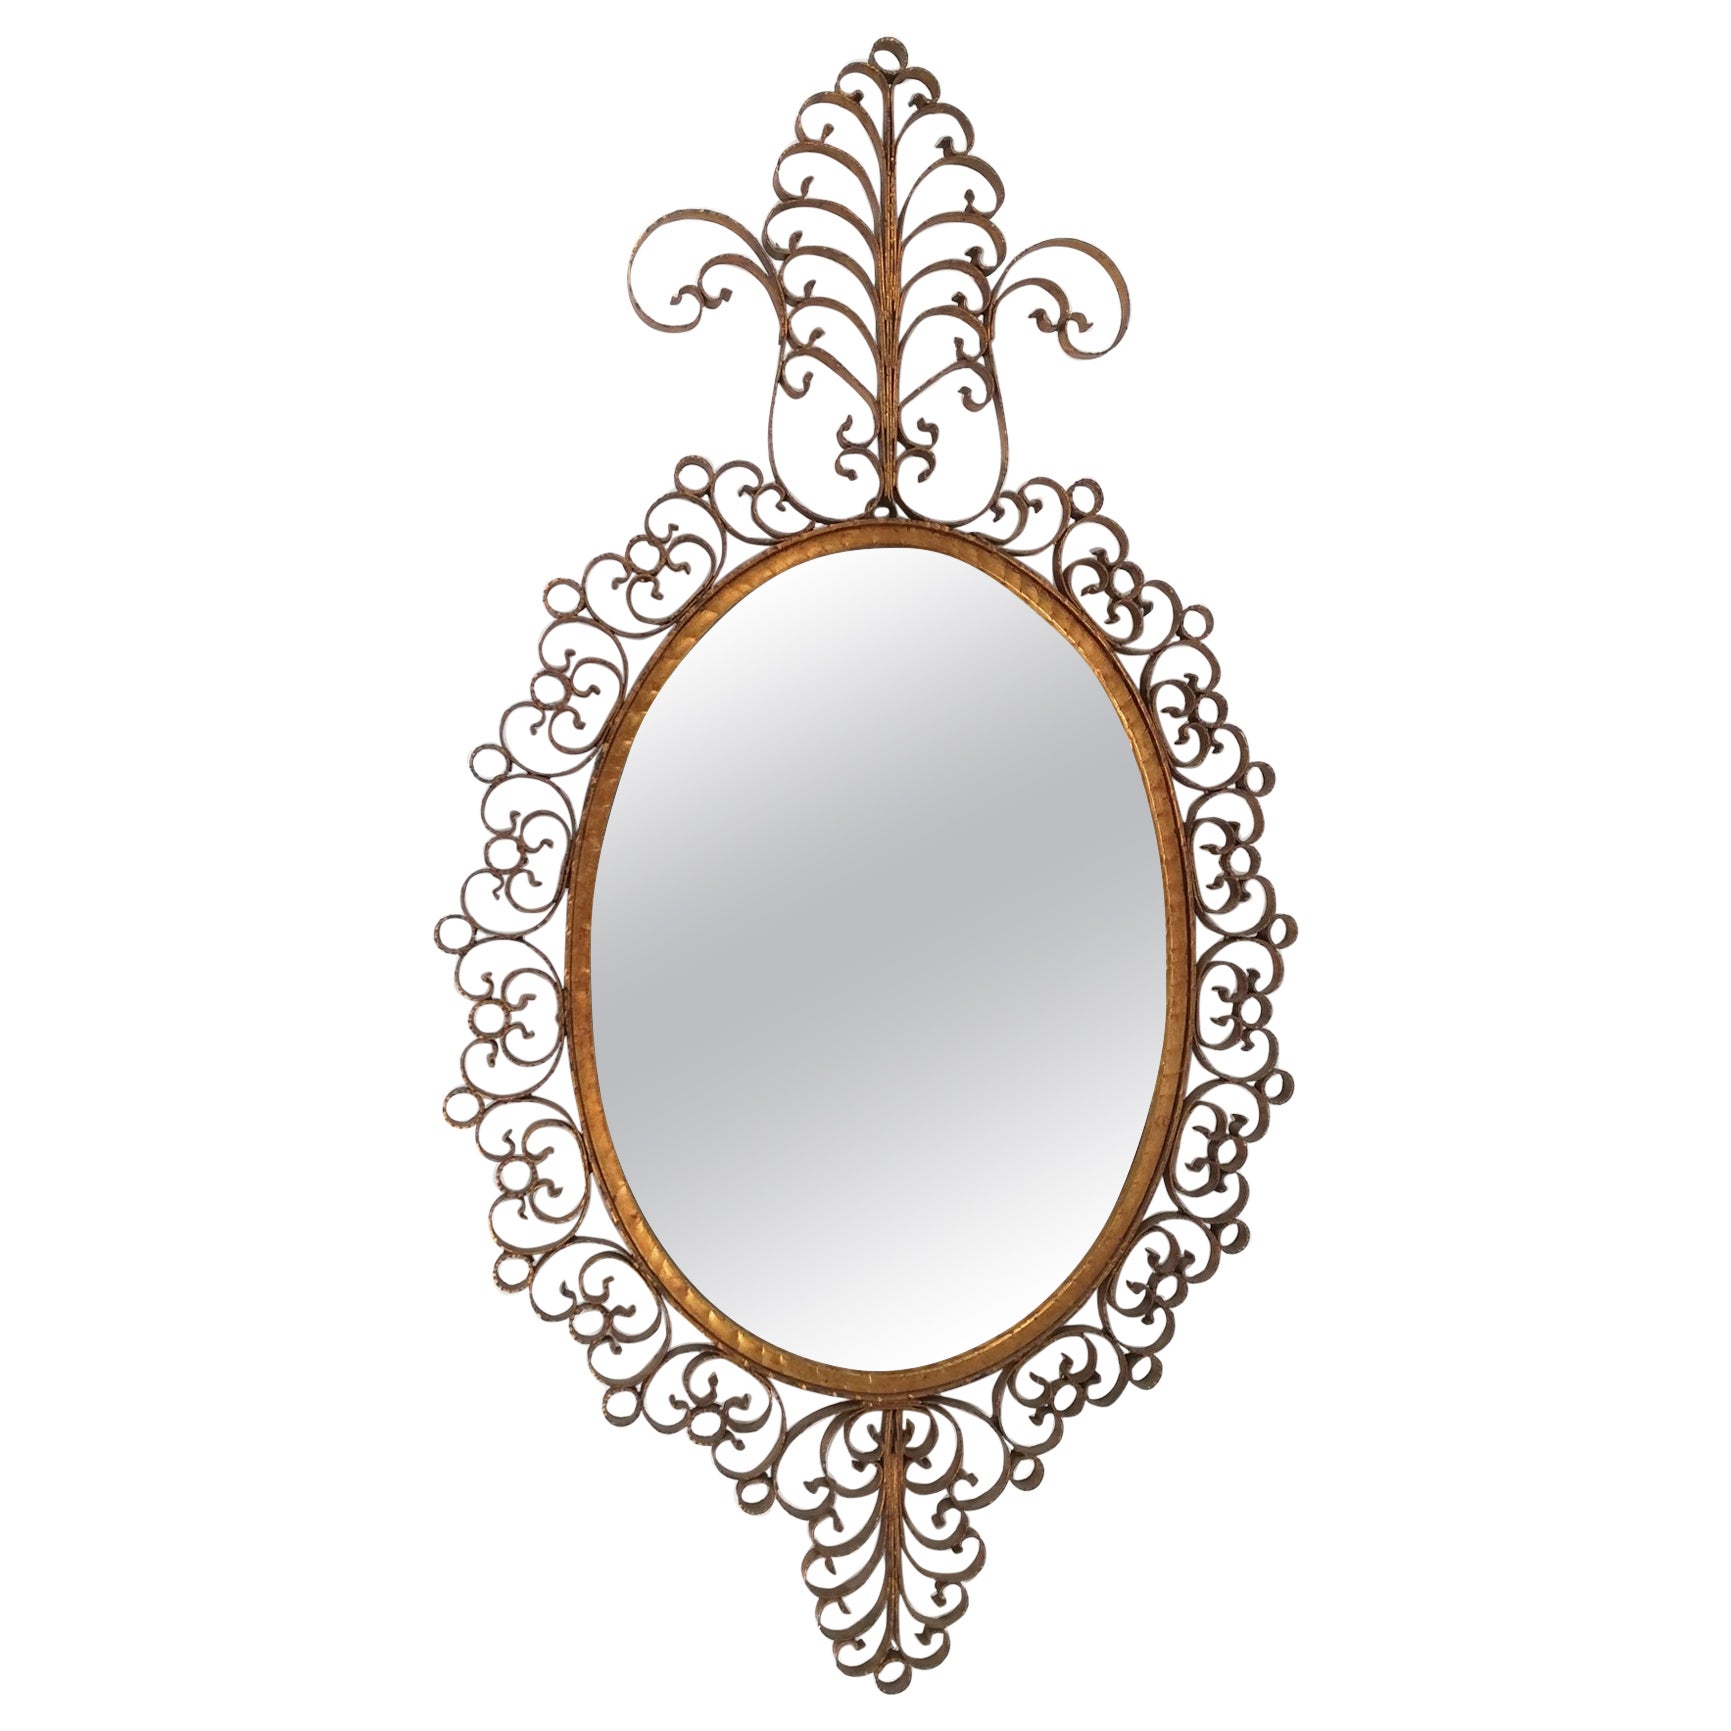 Hammered Wrought Iron Gilded Mirror in the Style of Pierluigi Colli, Italy, 1950 For Sale